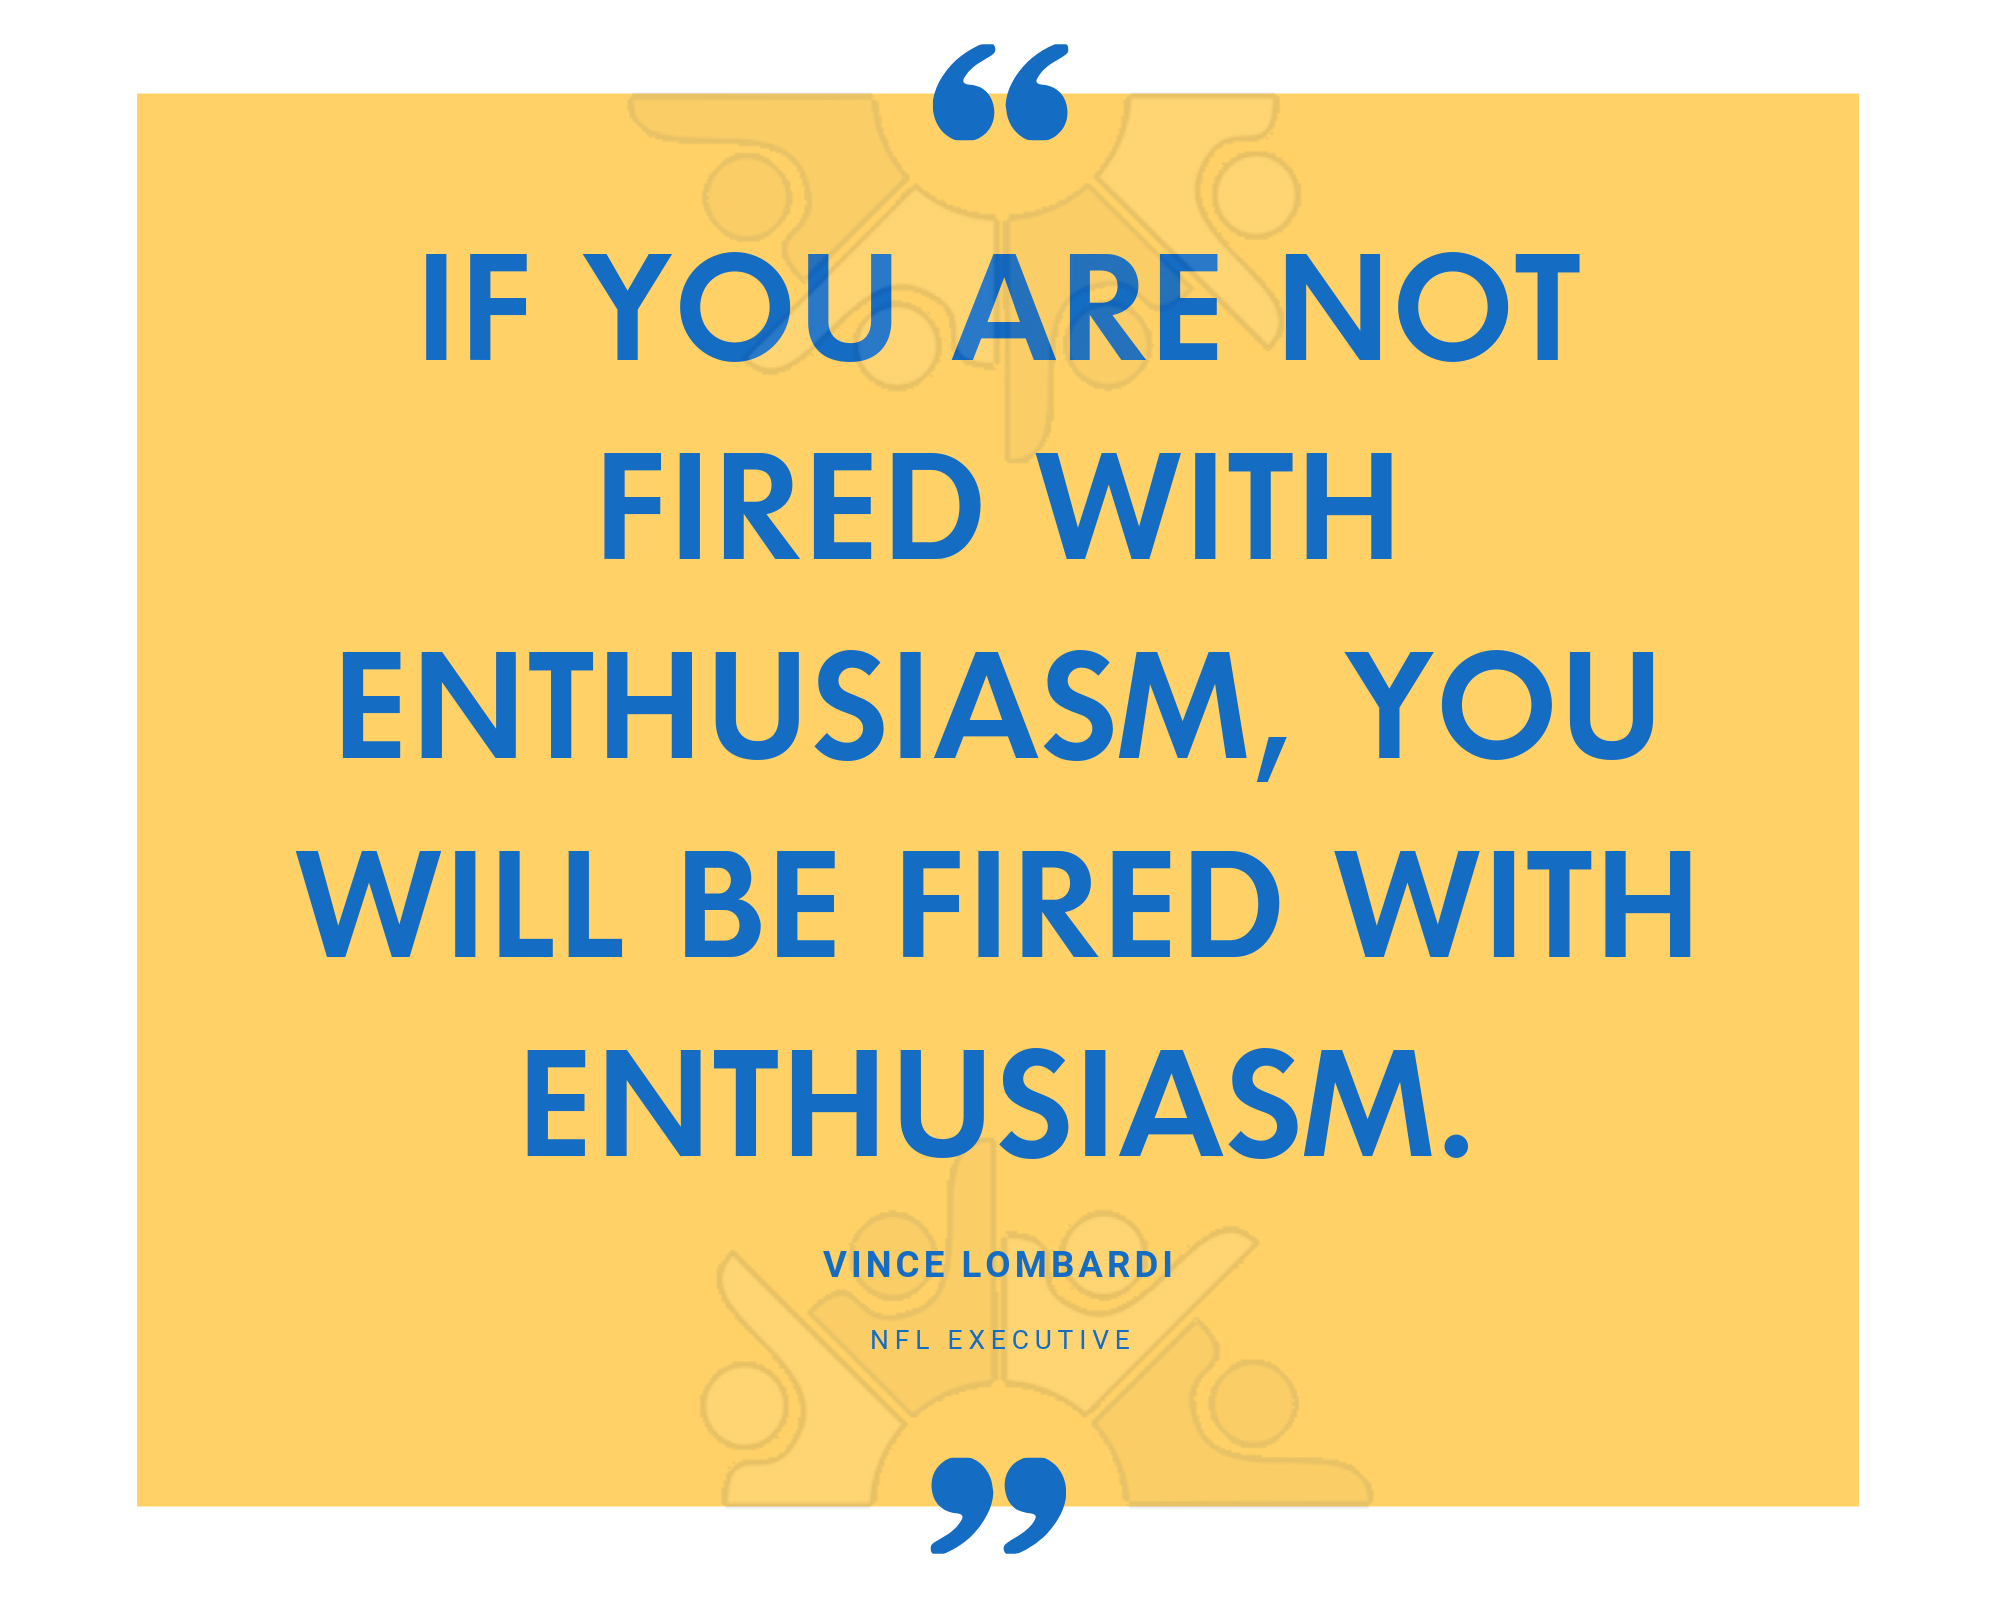 QUOTE If you are not fired with enthusiasm, you will be fired with enthusiasm.